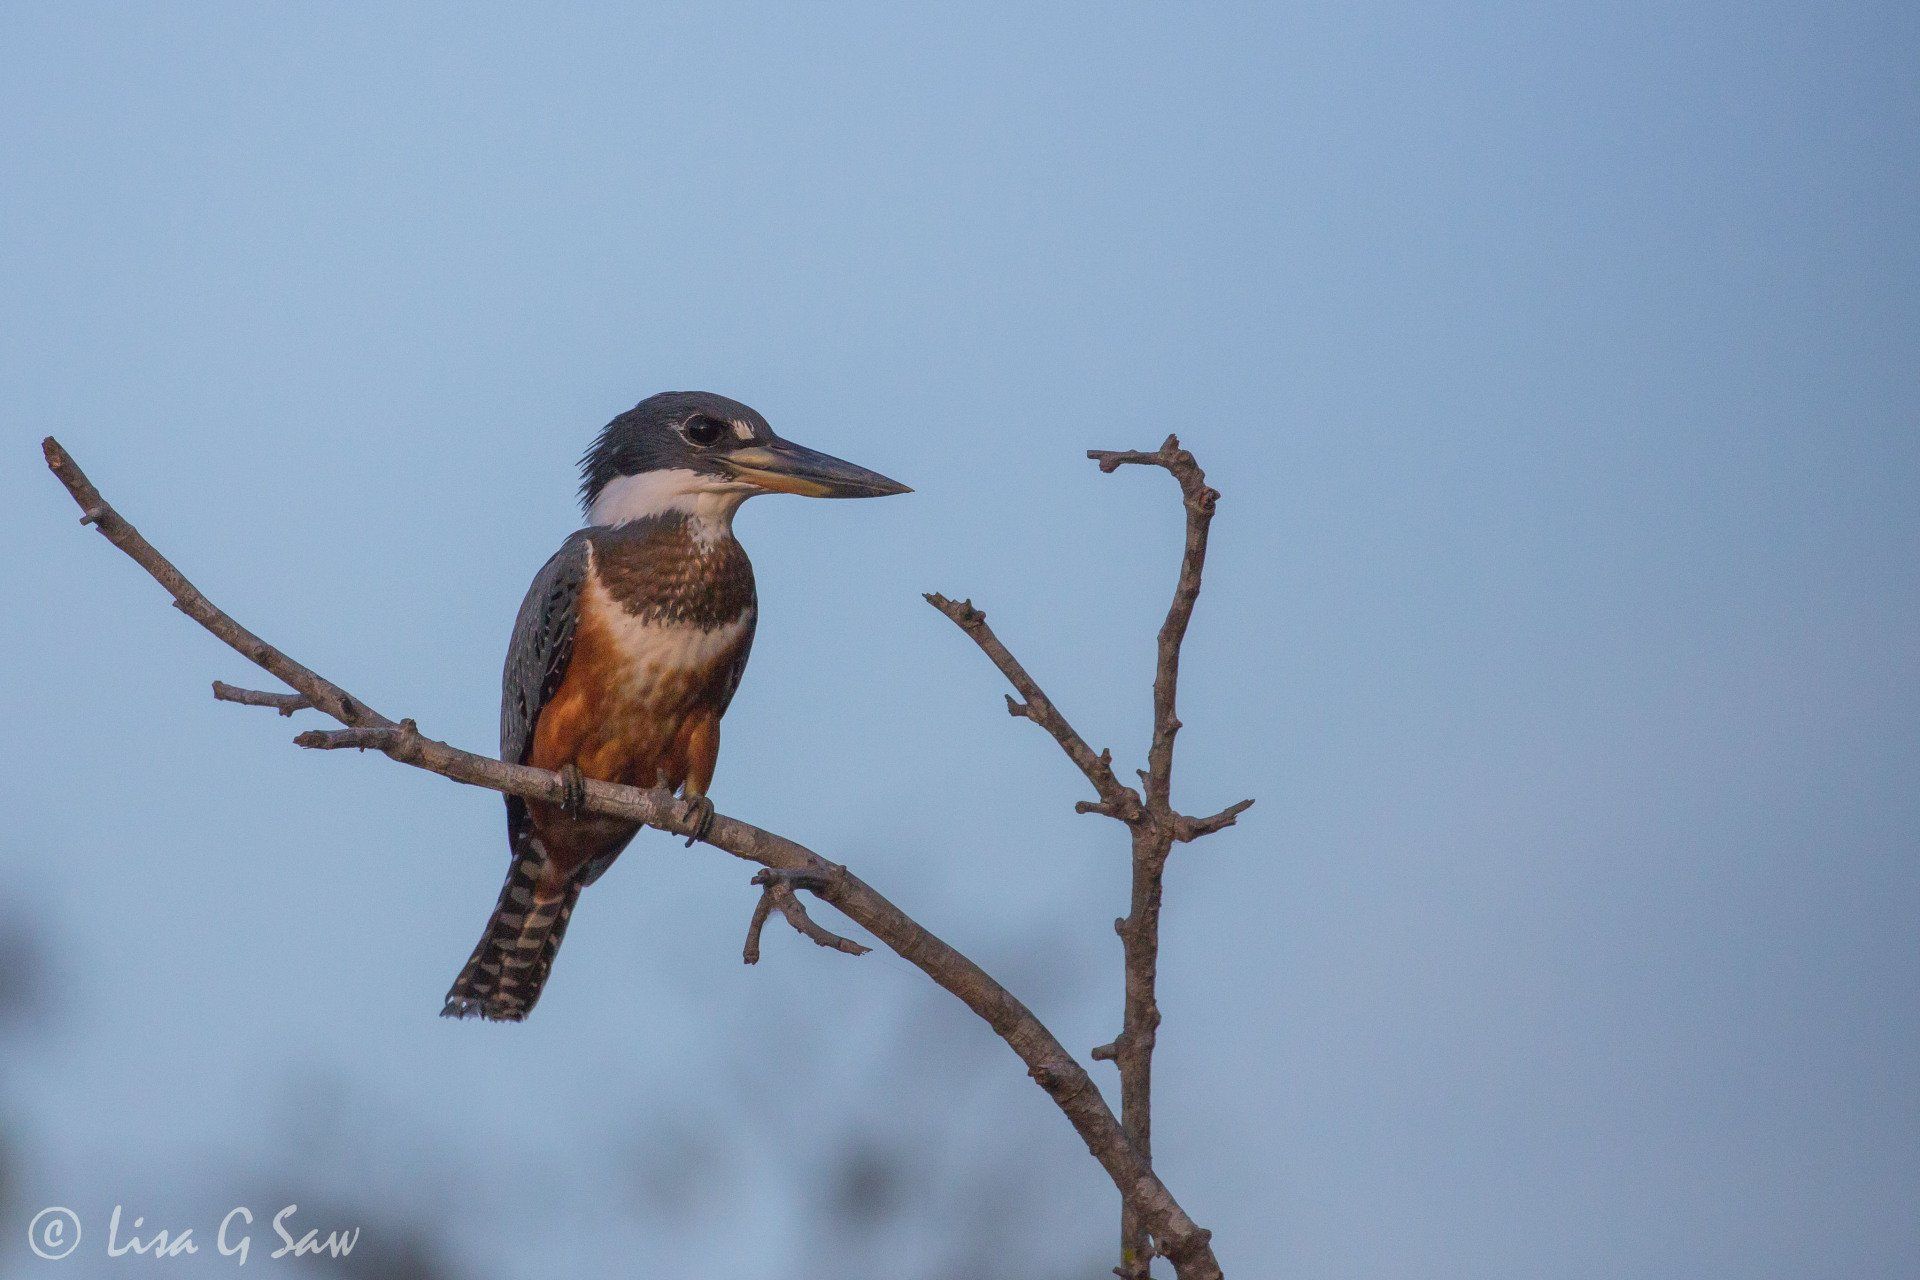 Female Ringed Kingfisher in the Pantanal